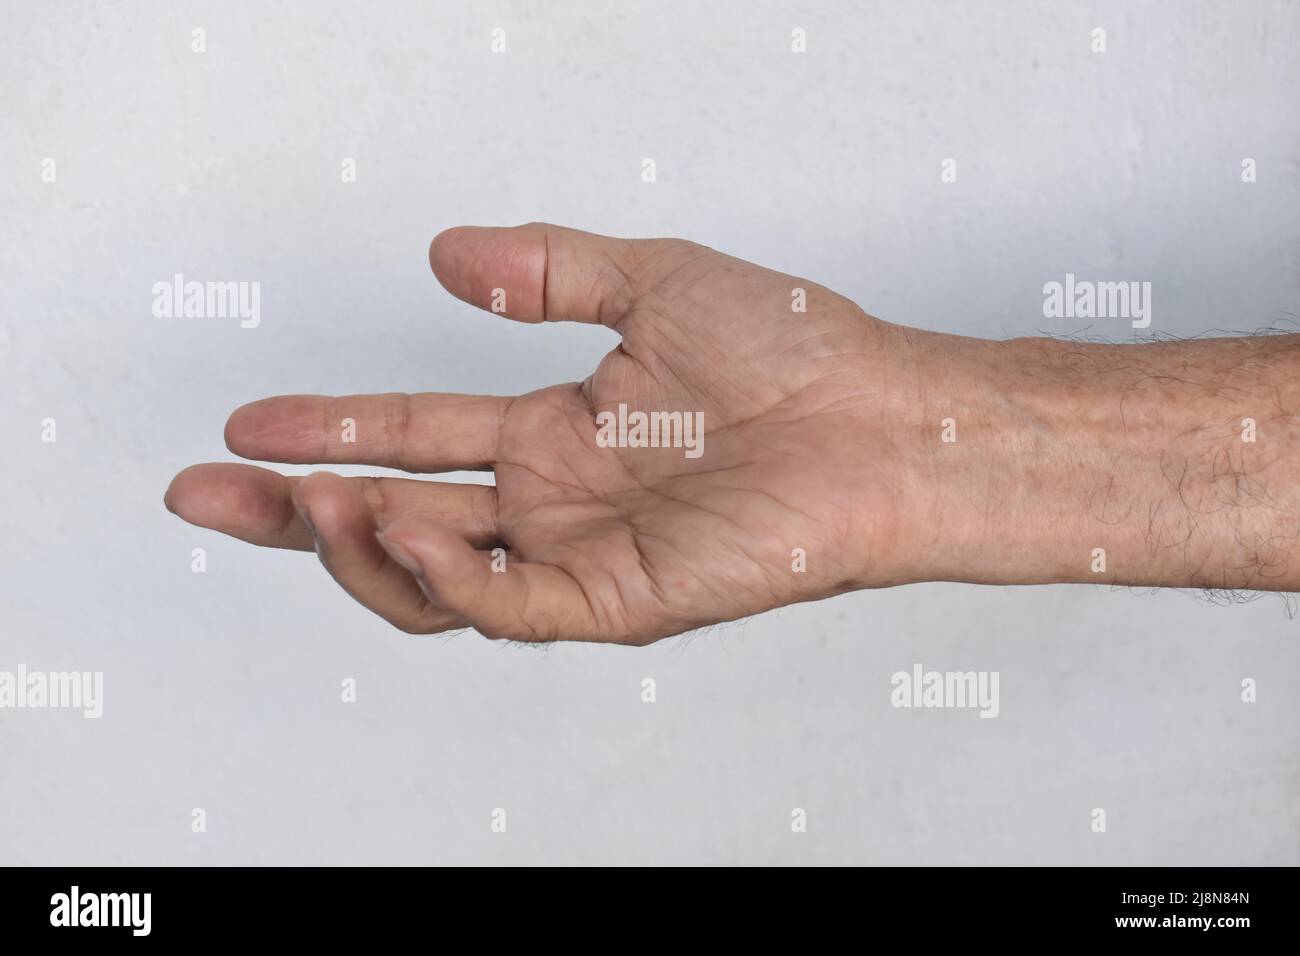 Ulnar claw hand of Asian elder man. also known as spinster claw. develops due to ulnar nerve damage causing weakness of the lumbricals. Stock Photo